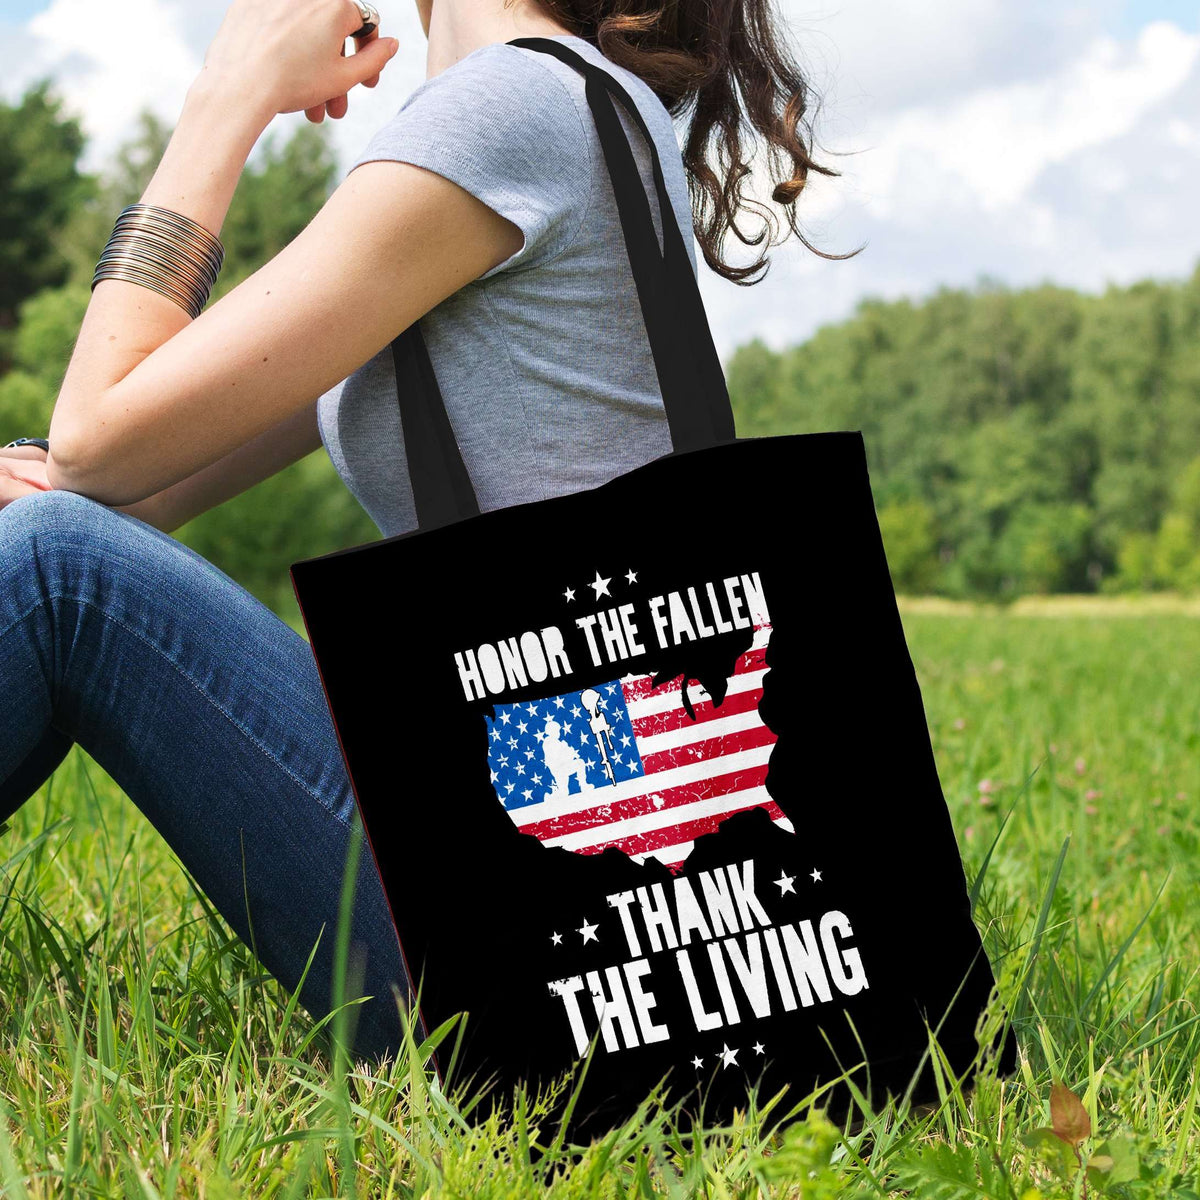 Designs by MyUtopia Shout Out:Honor The Fallen Thank The Living Memorial Day Fabric Totebag Reusable Shopping Tote